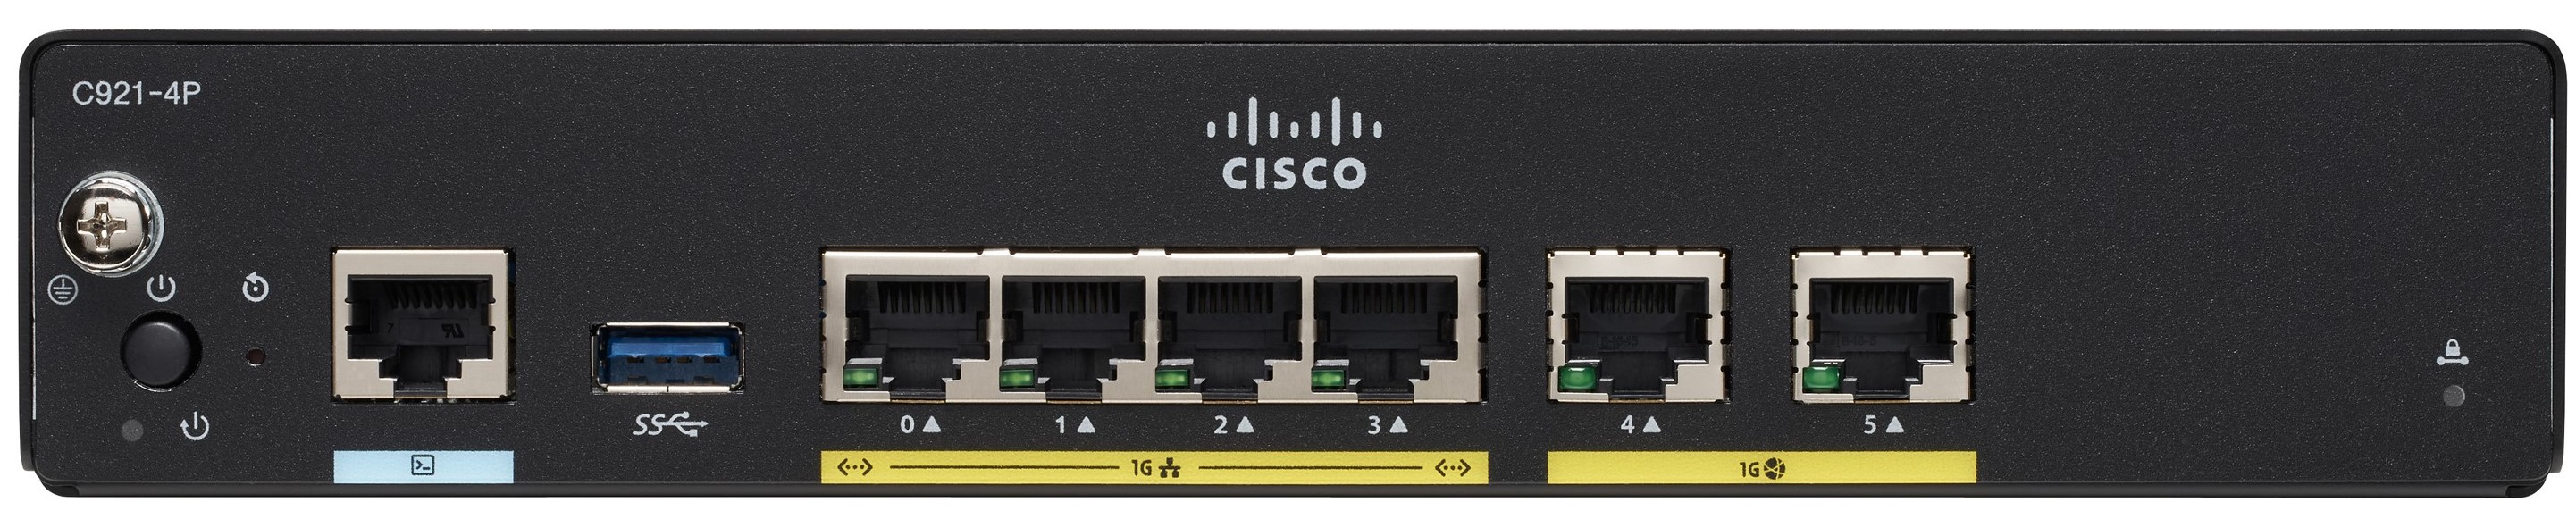 Cisco 900 Series Integrated Services Router (ISR)